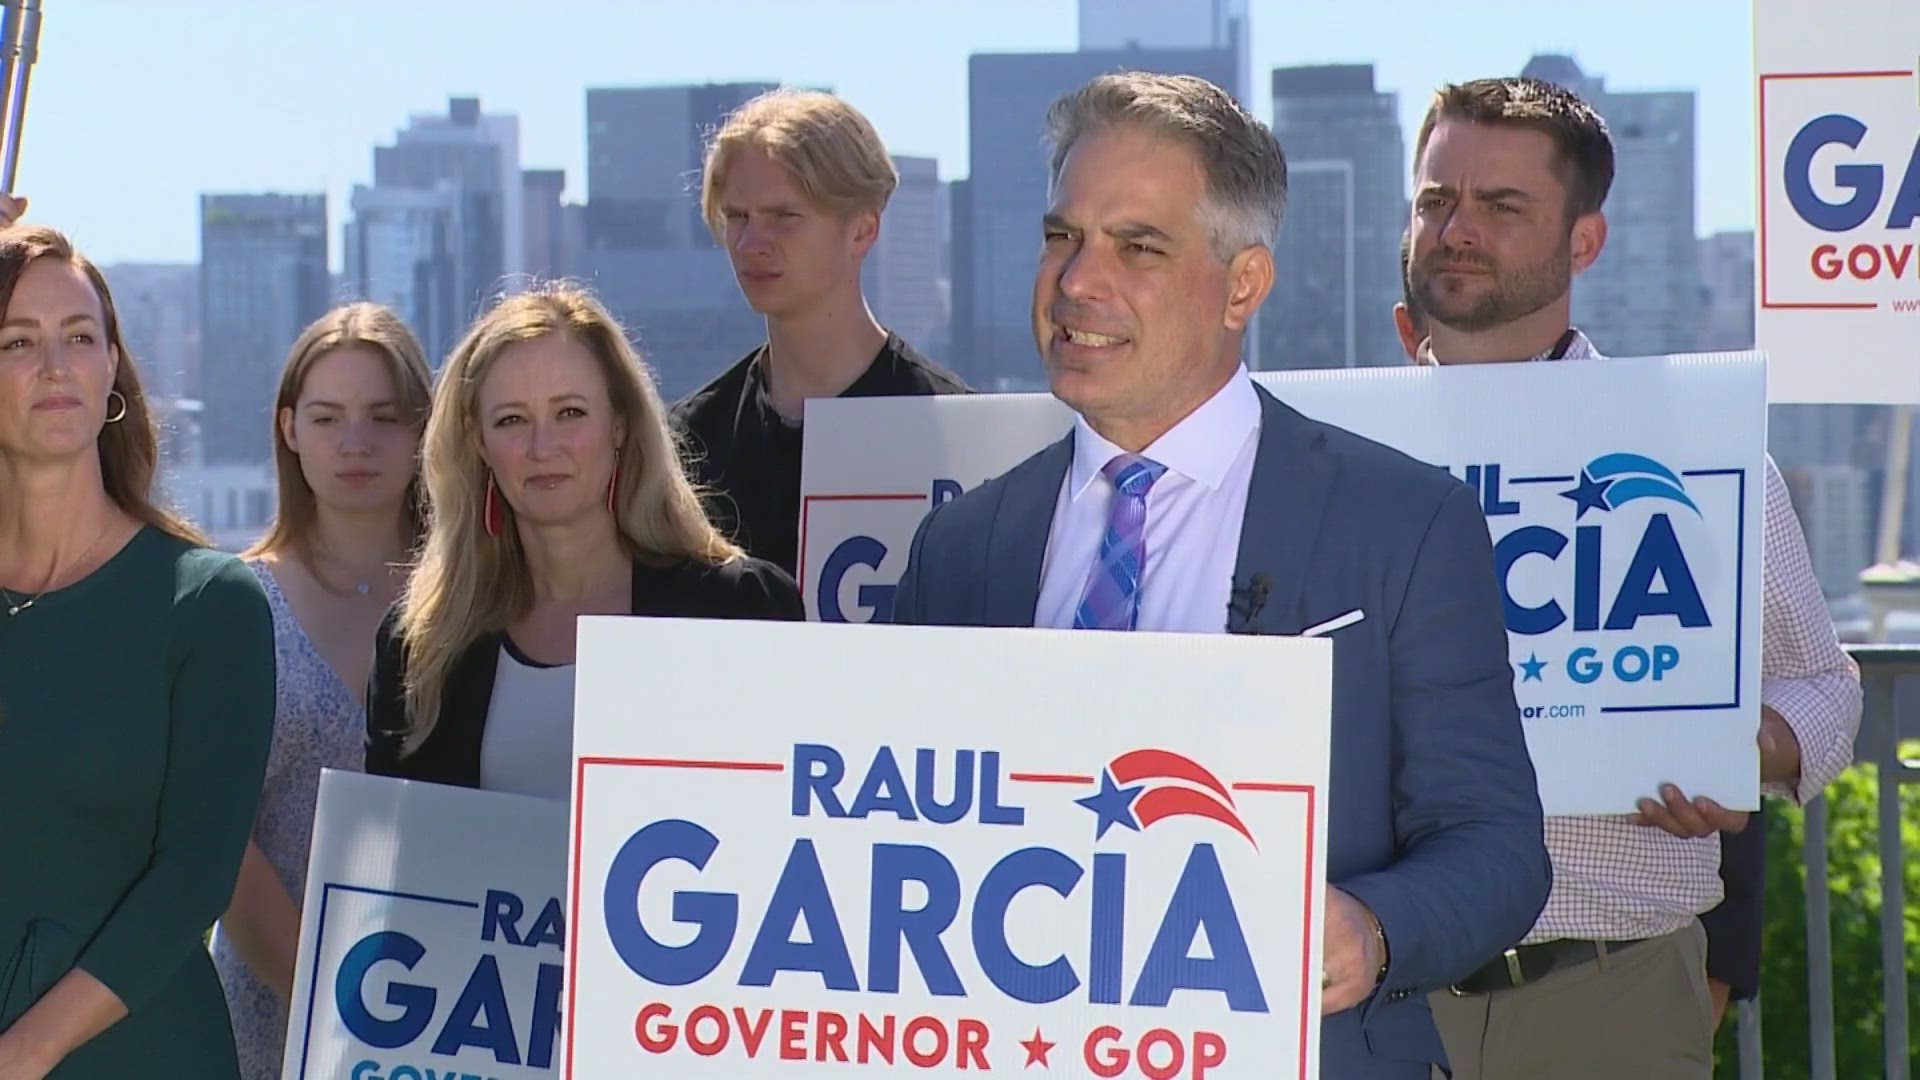 Raul Garcia became one of the first Republicans to announce a campaign for Washington governor on Friday.